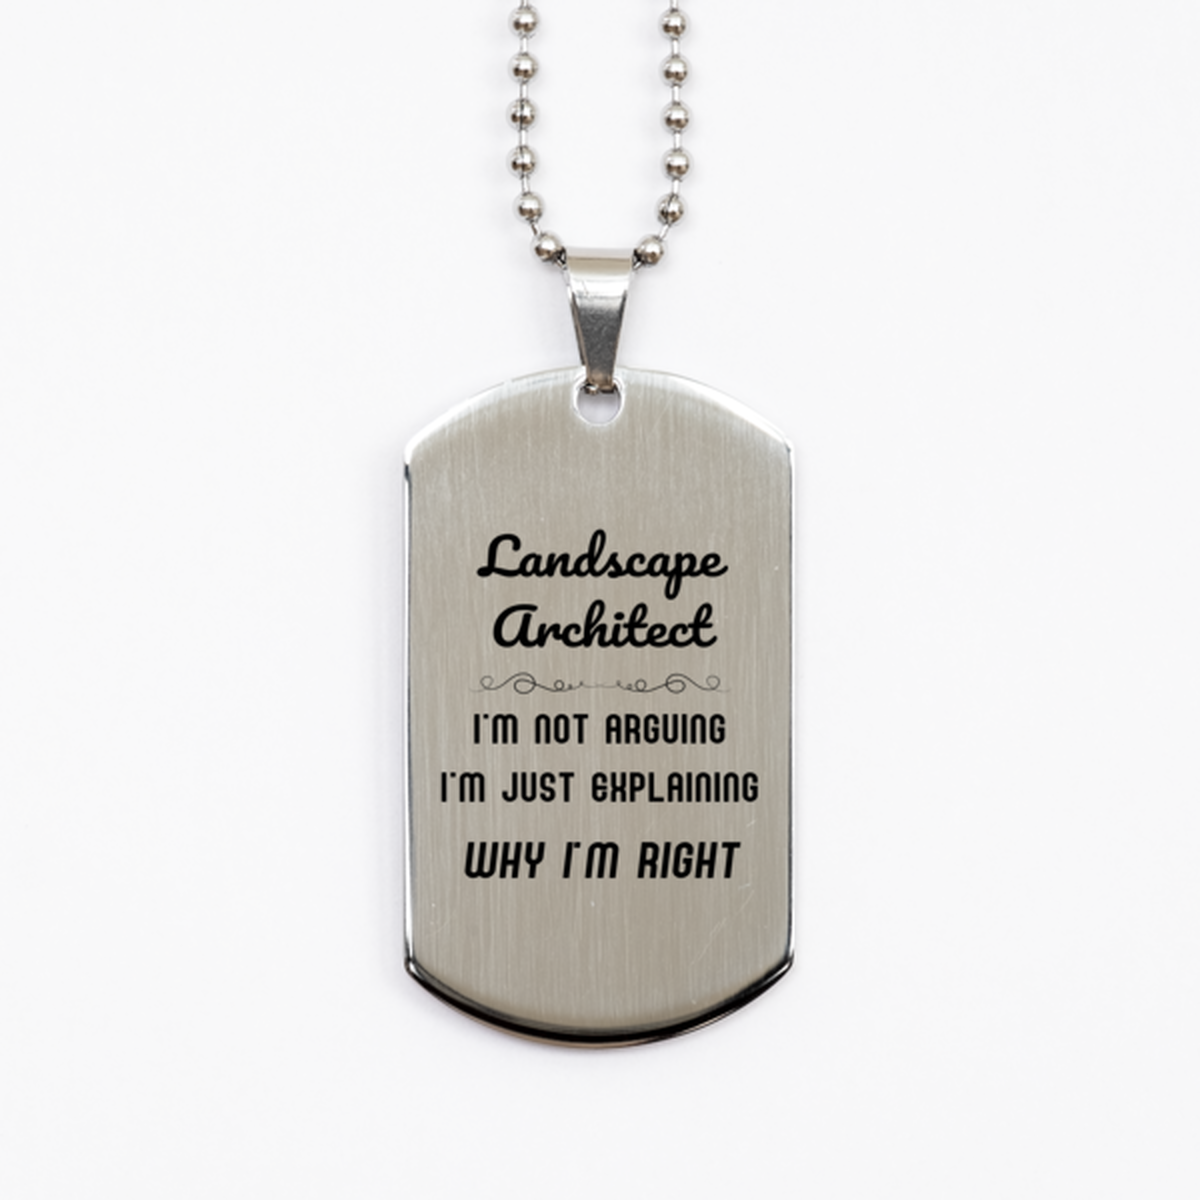 Landscape Architect I'm not Arguing. I'm Just Explaining Why I'm RIGHT Silver Dog Tag, Funny Saying Quote Landscape Architect Gifts For Landscape Architect Graduation Birthday Christmas Gifts for Men Women Coworker